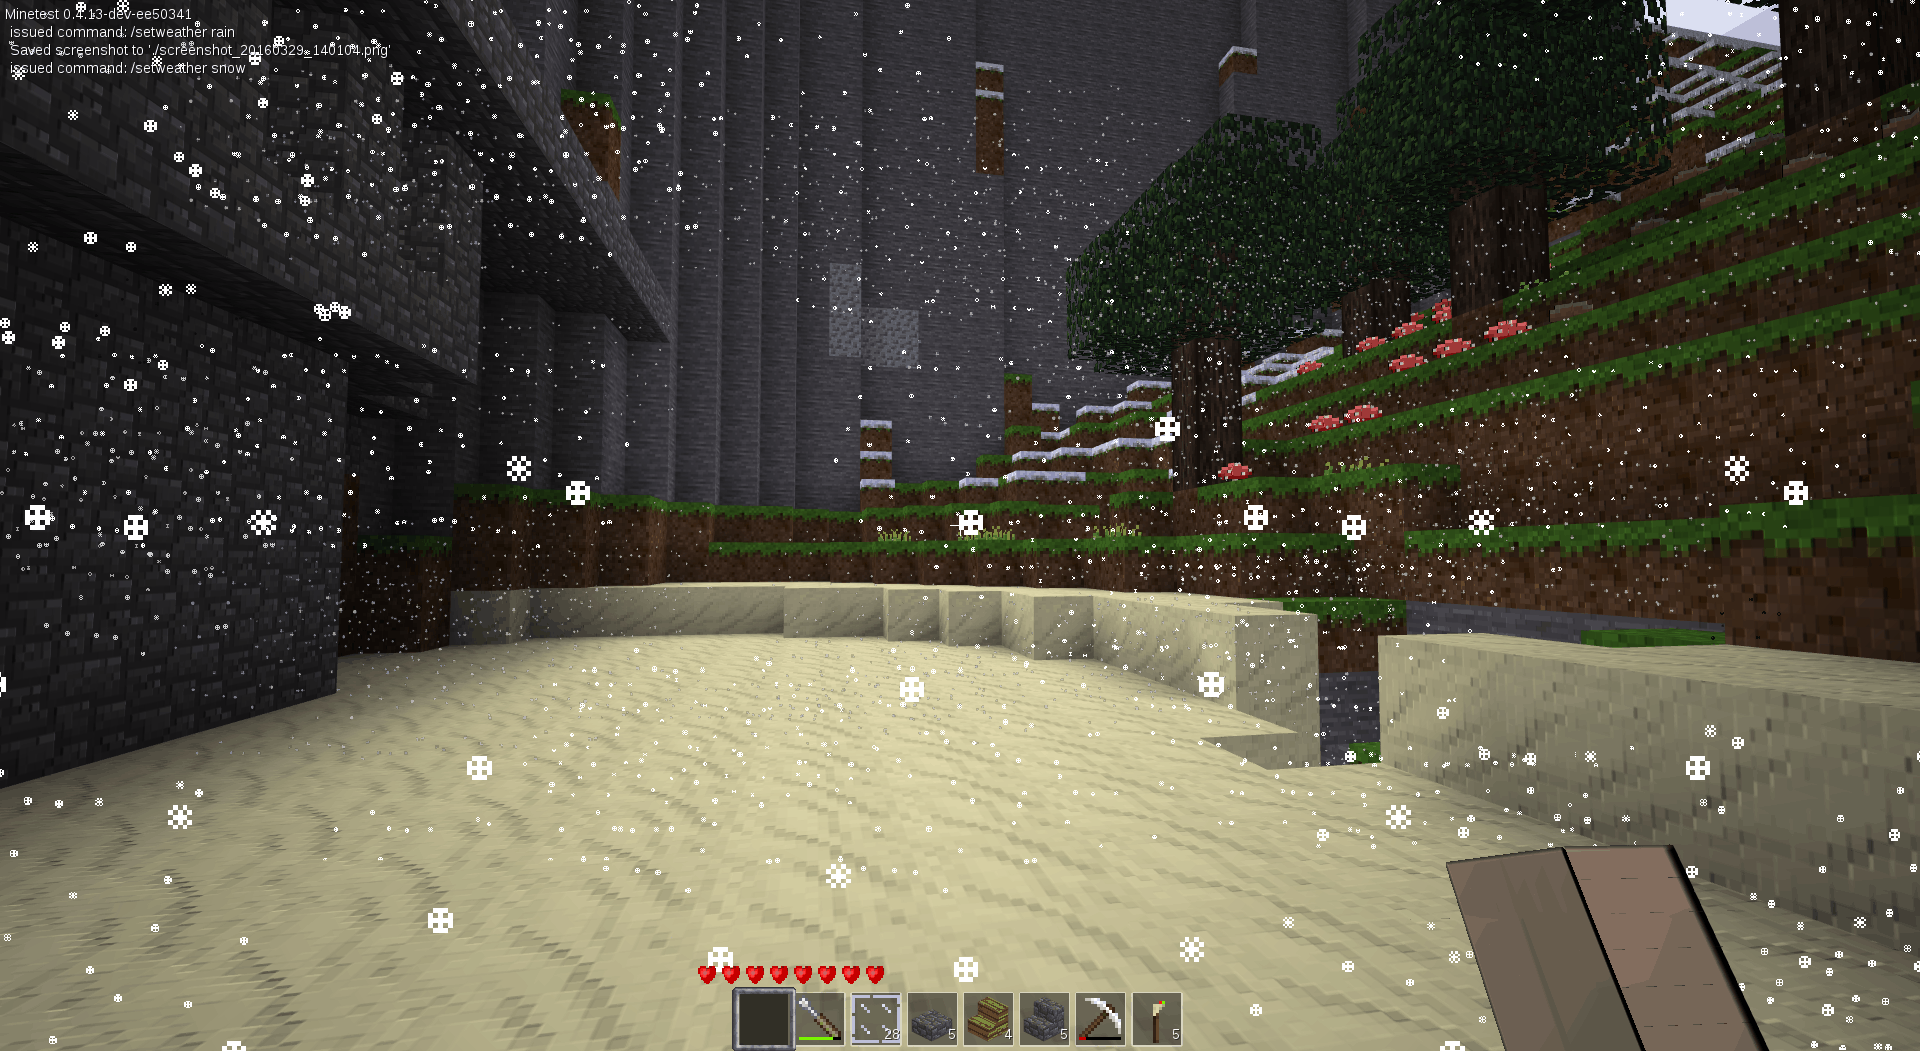 Make it snow with the weather mod.